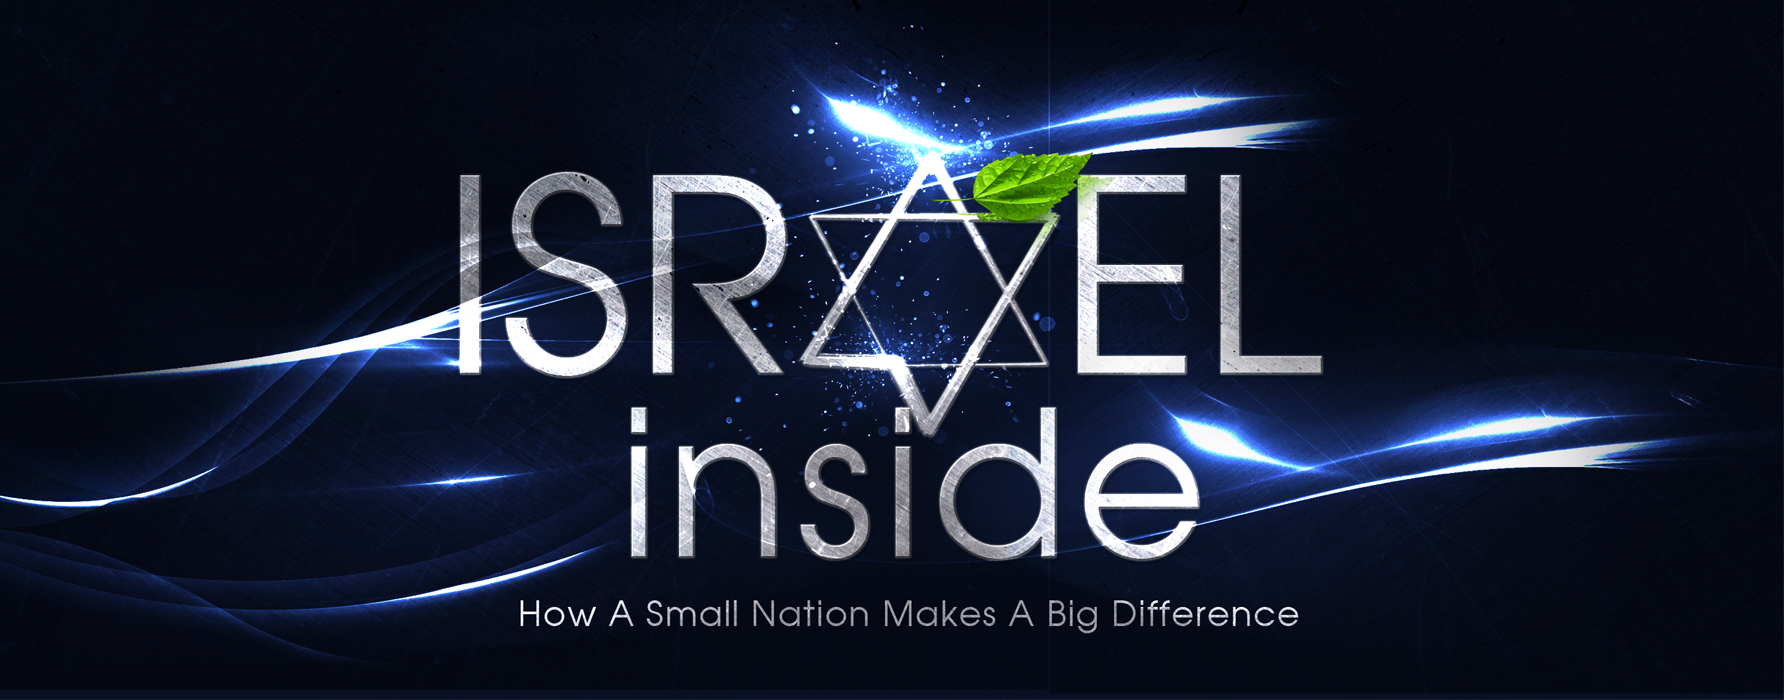 Israel Inside: How a Small Nation Makes a Big Diff [DVD](品)